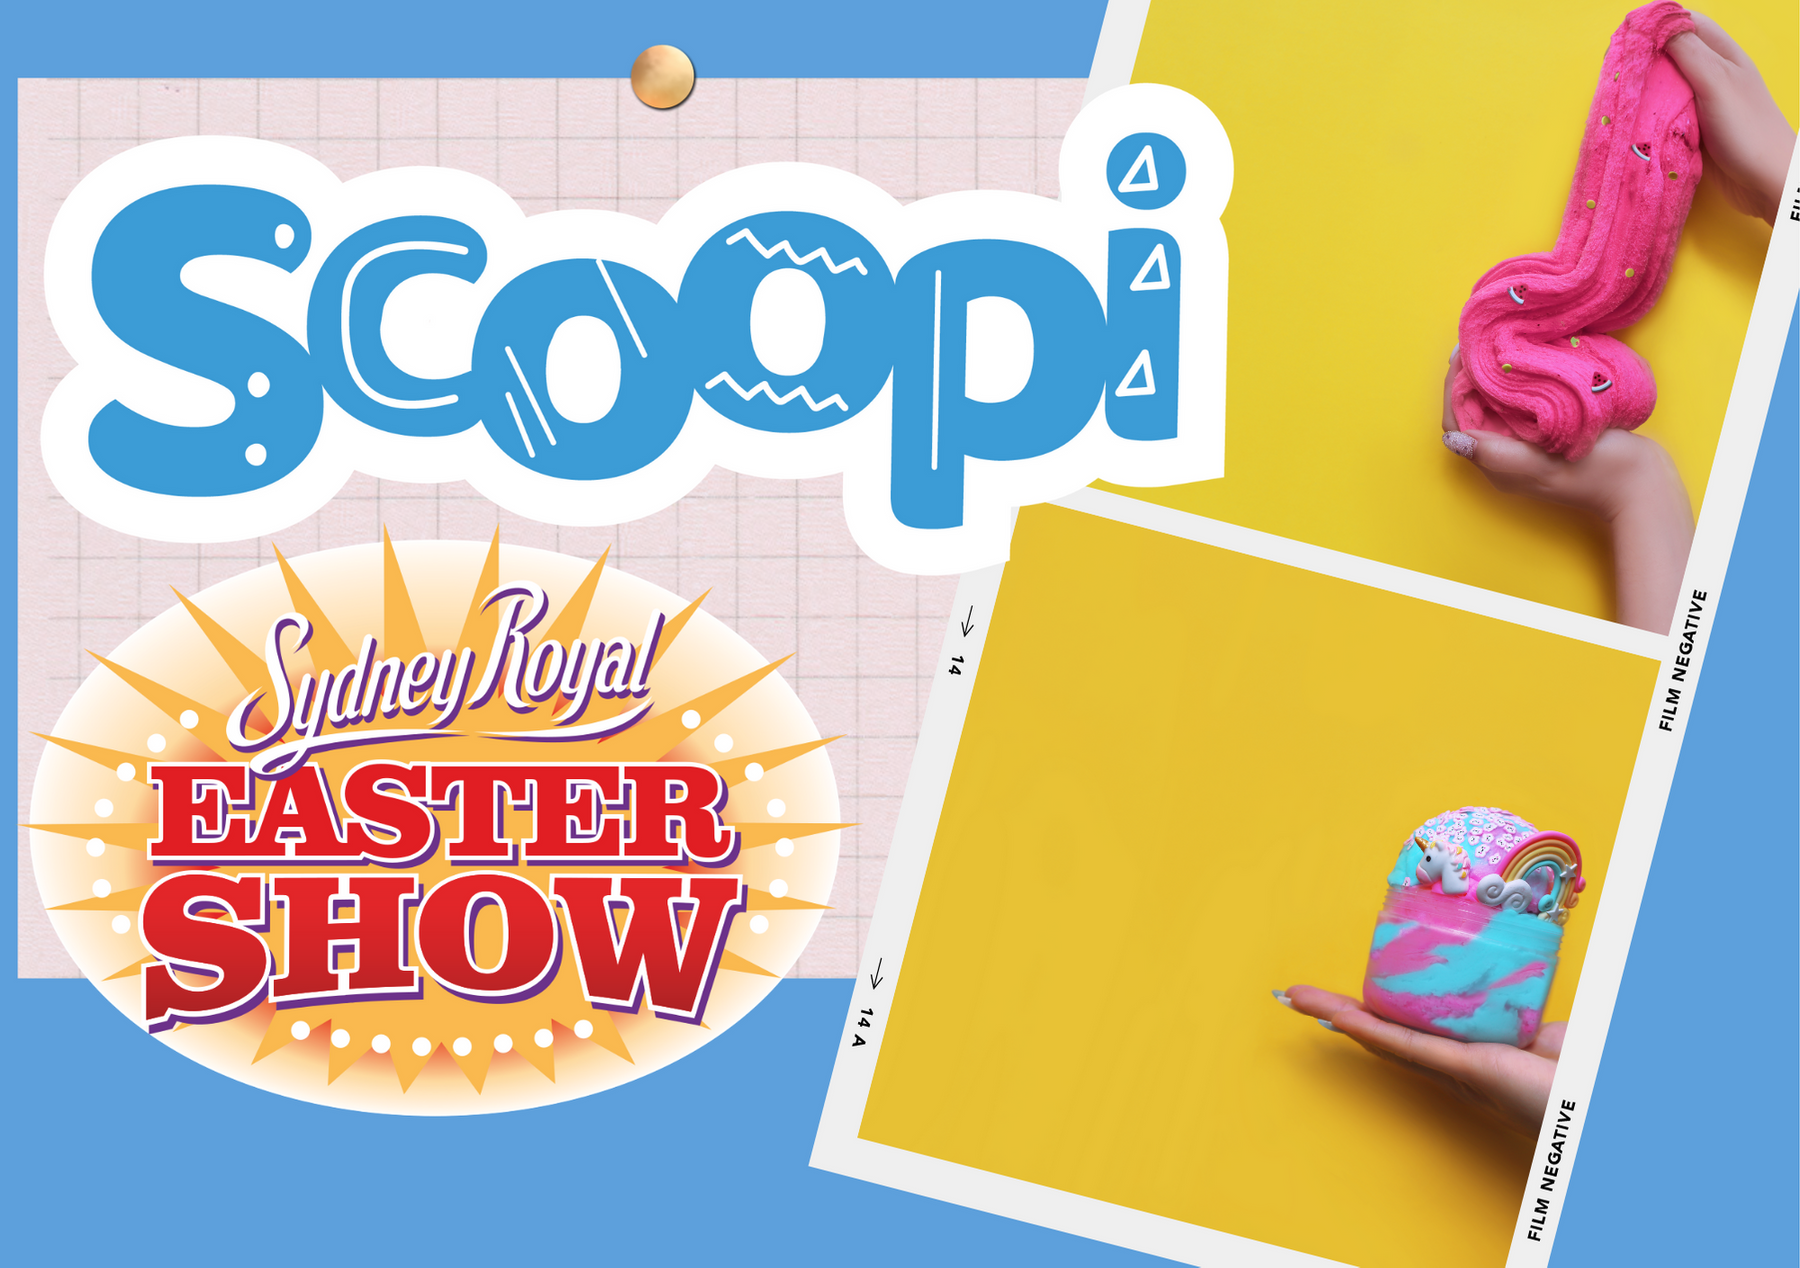 Scoopi x The Sydney Royal Easter Show